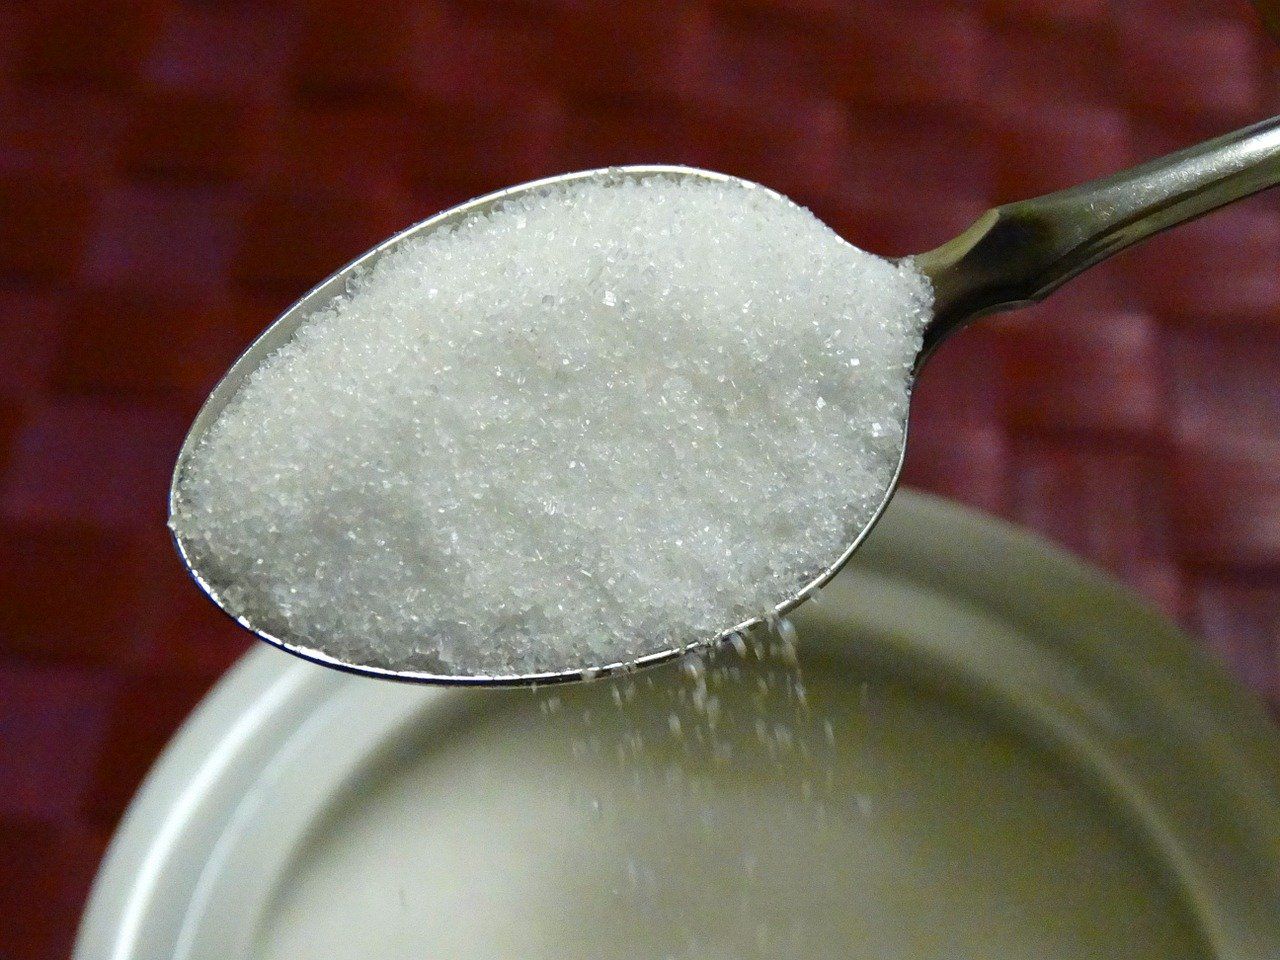 Xylitol is an artificial sweetener that is poisonous to animals